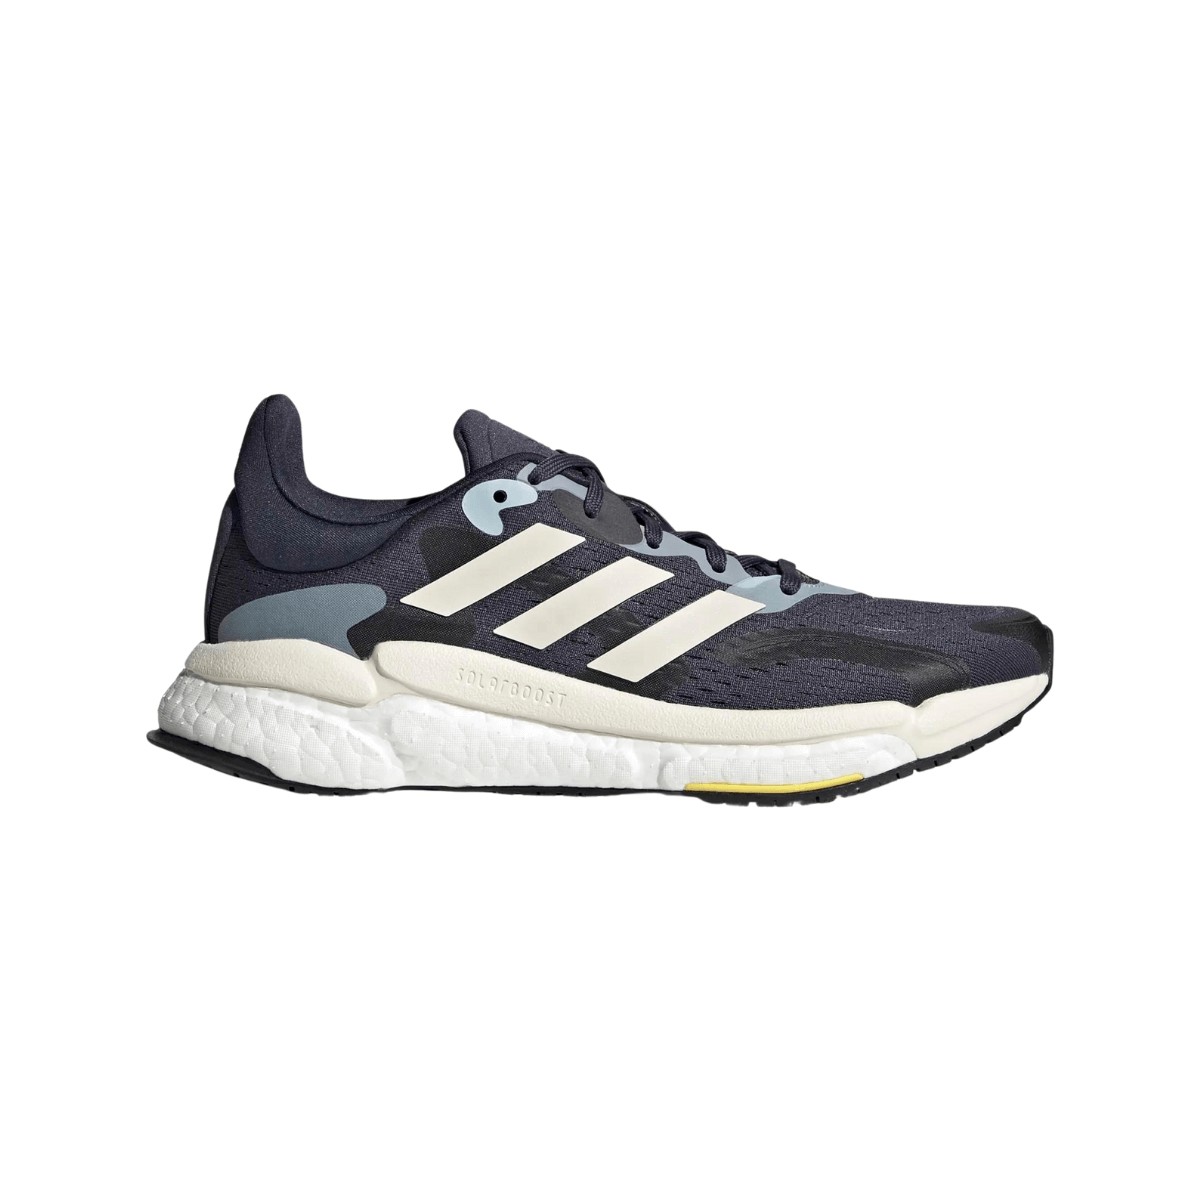 Adidas Solar Boost 4 Women's Shoes Blue Beige AW22, Size UK 5